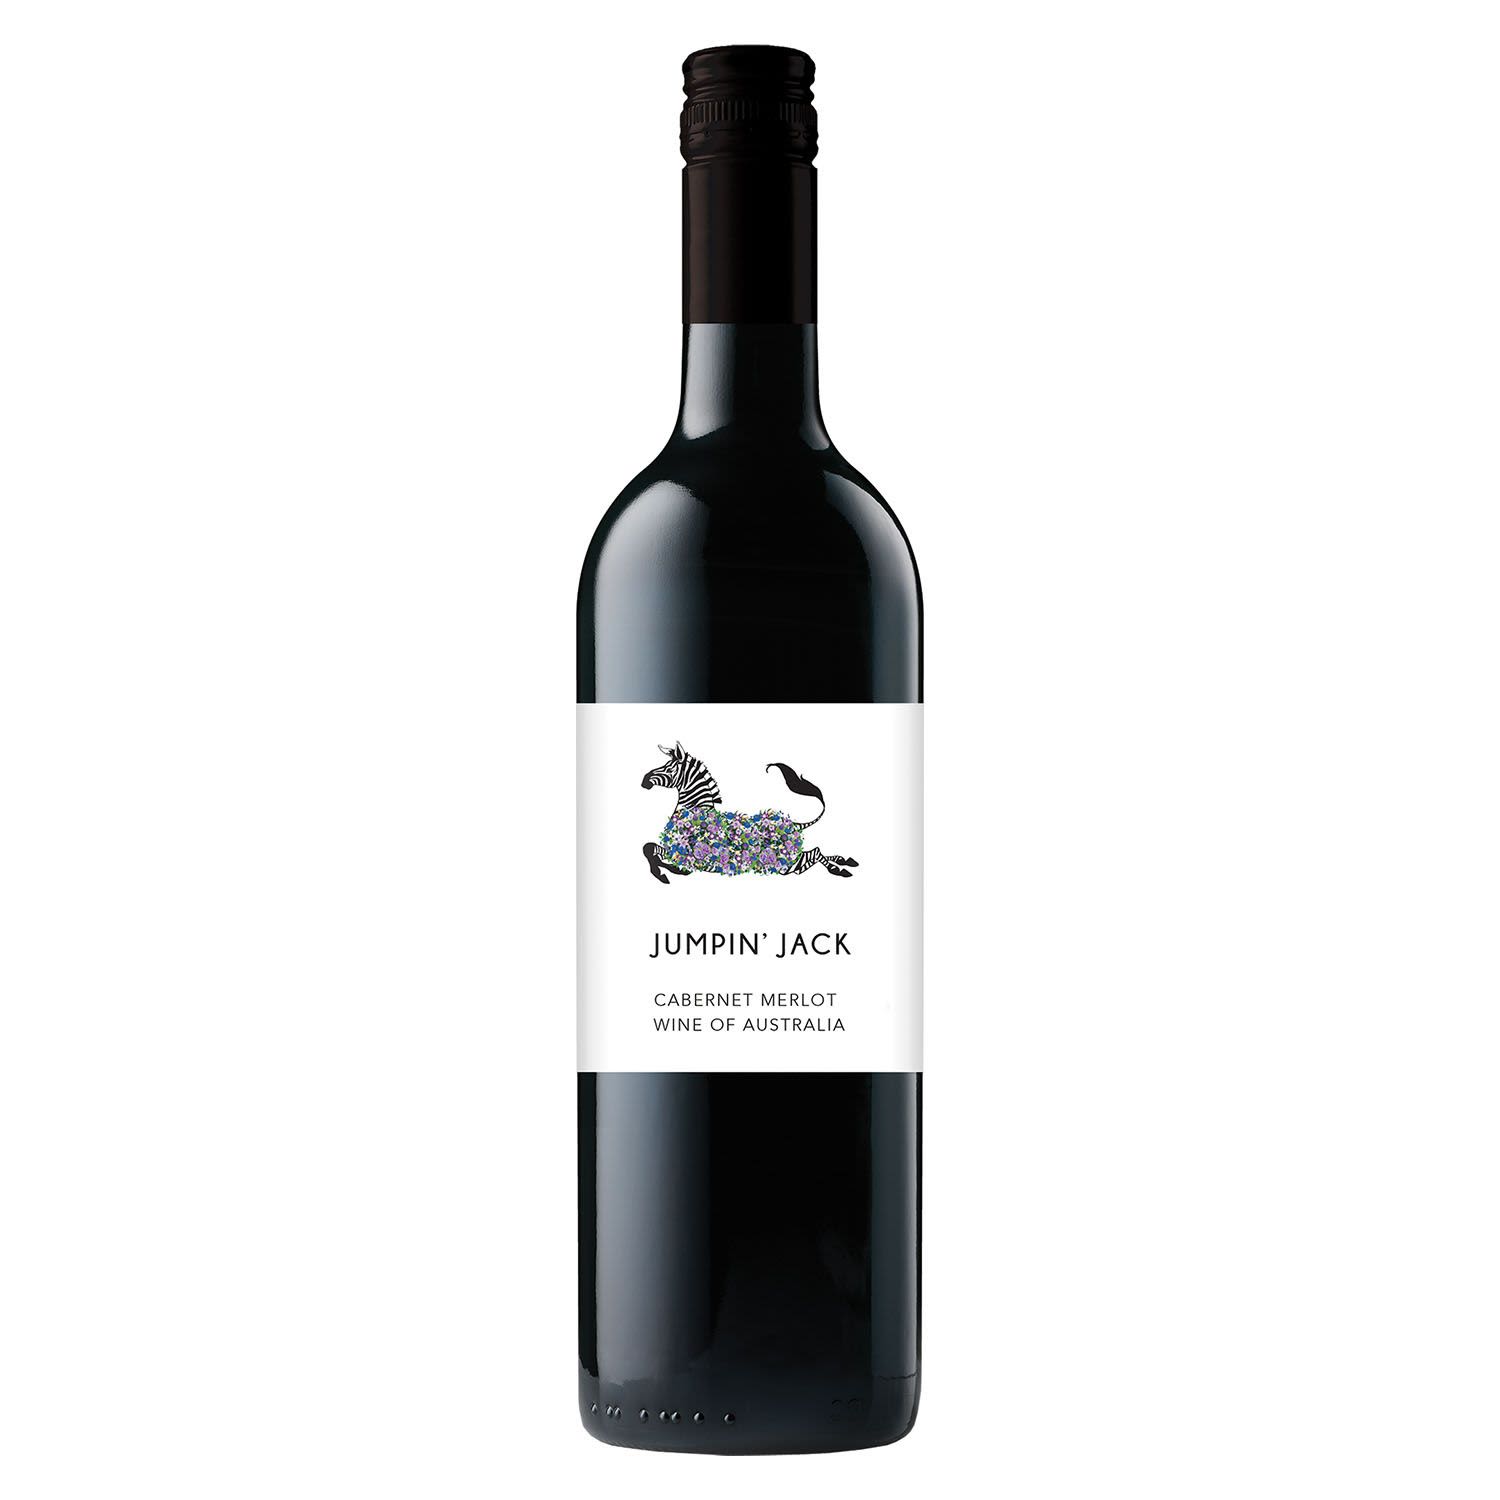 Jumpin Jack Cabernet Merlot is round and smooth with classic Cabernet aromas and flavours. The soft, plummy influence of Merlot gives this ample mid-palate plushness while the Cabernet imparts terrific structural integrity. The finish is long and satisfying.<br /> <br />Alcohol Volume: 13.50%<br /><br />Pack Format: Bottle<br /><br />Standard Drinks: 8</br /><br />Pack Type: Bottle<br /><br />Country of Origin: Australia<br /><br />Region: South Eastern Australia<br /><br />Vintage: Vintages Vary<br />